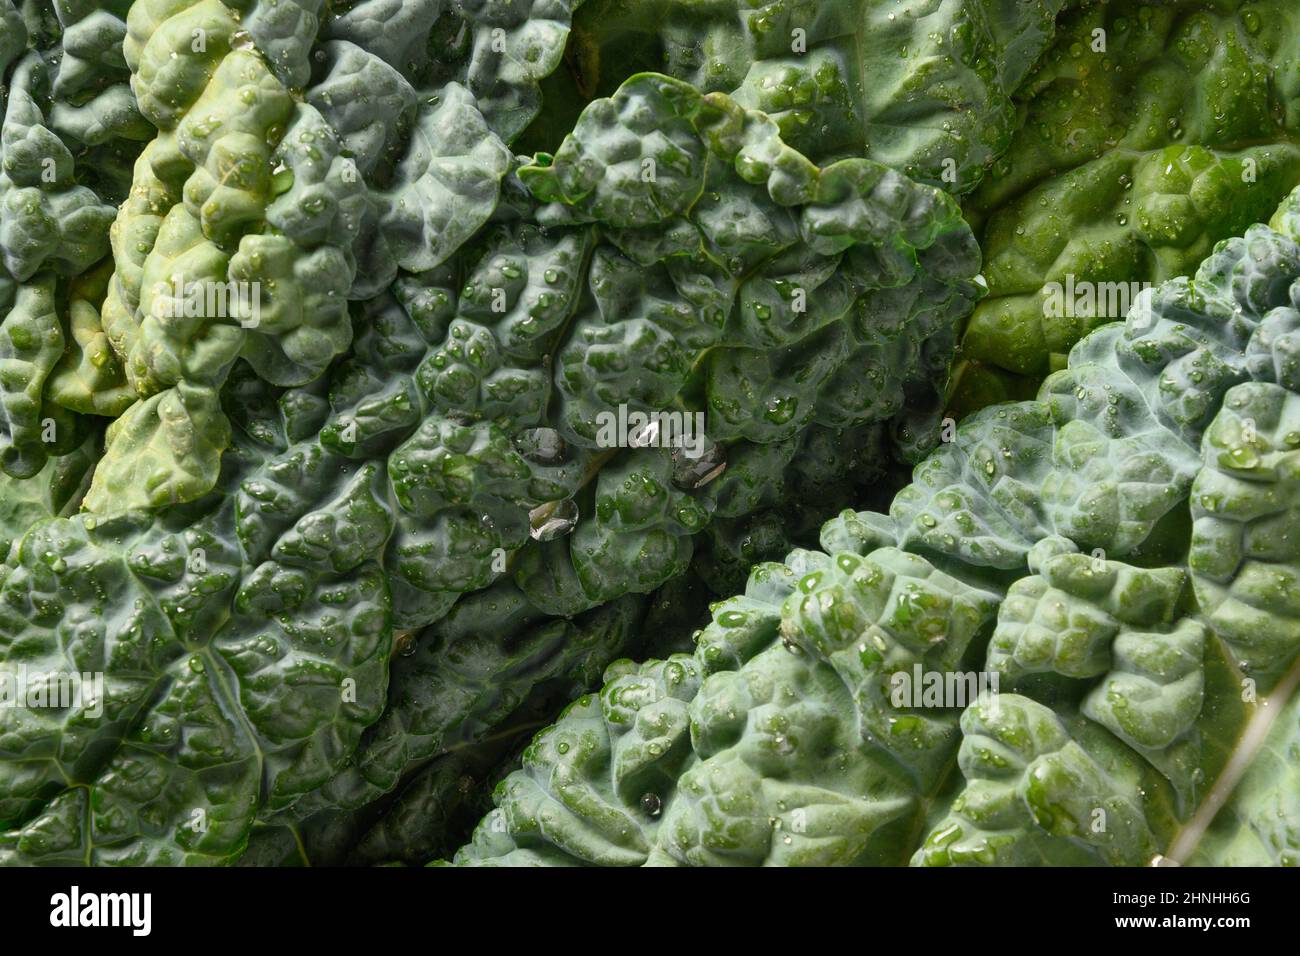 Leaf of popular tuscan kale salad as background. Eco organic food. View from above. Close up. Natural greens texture. Stock Photo